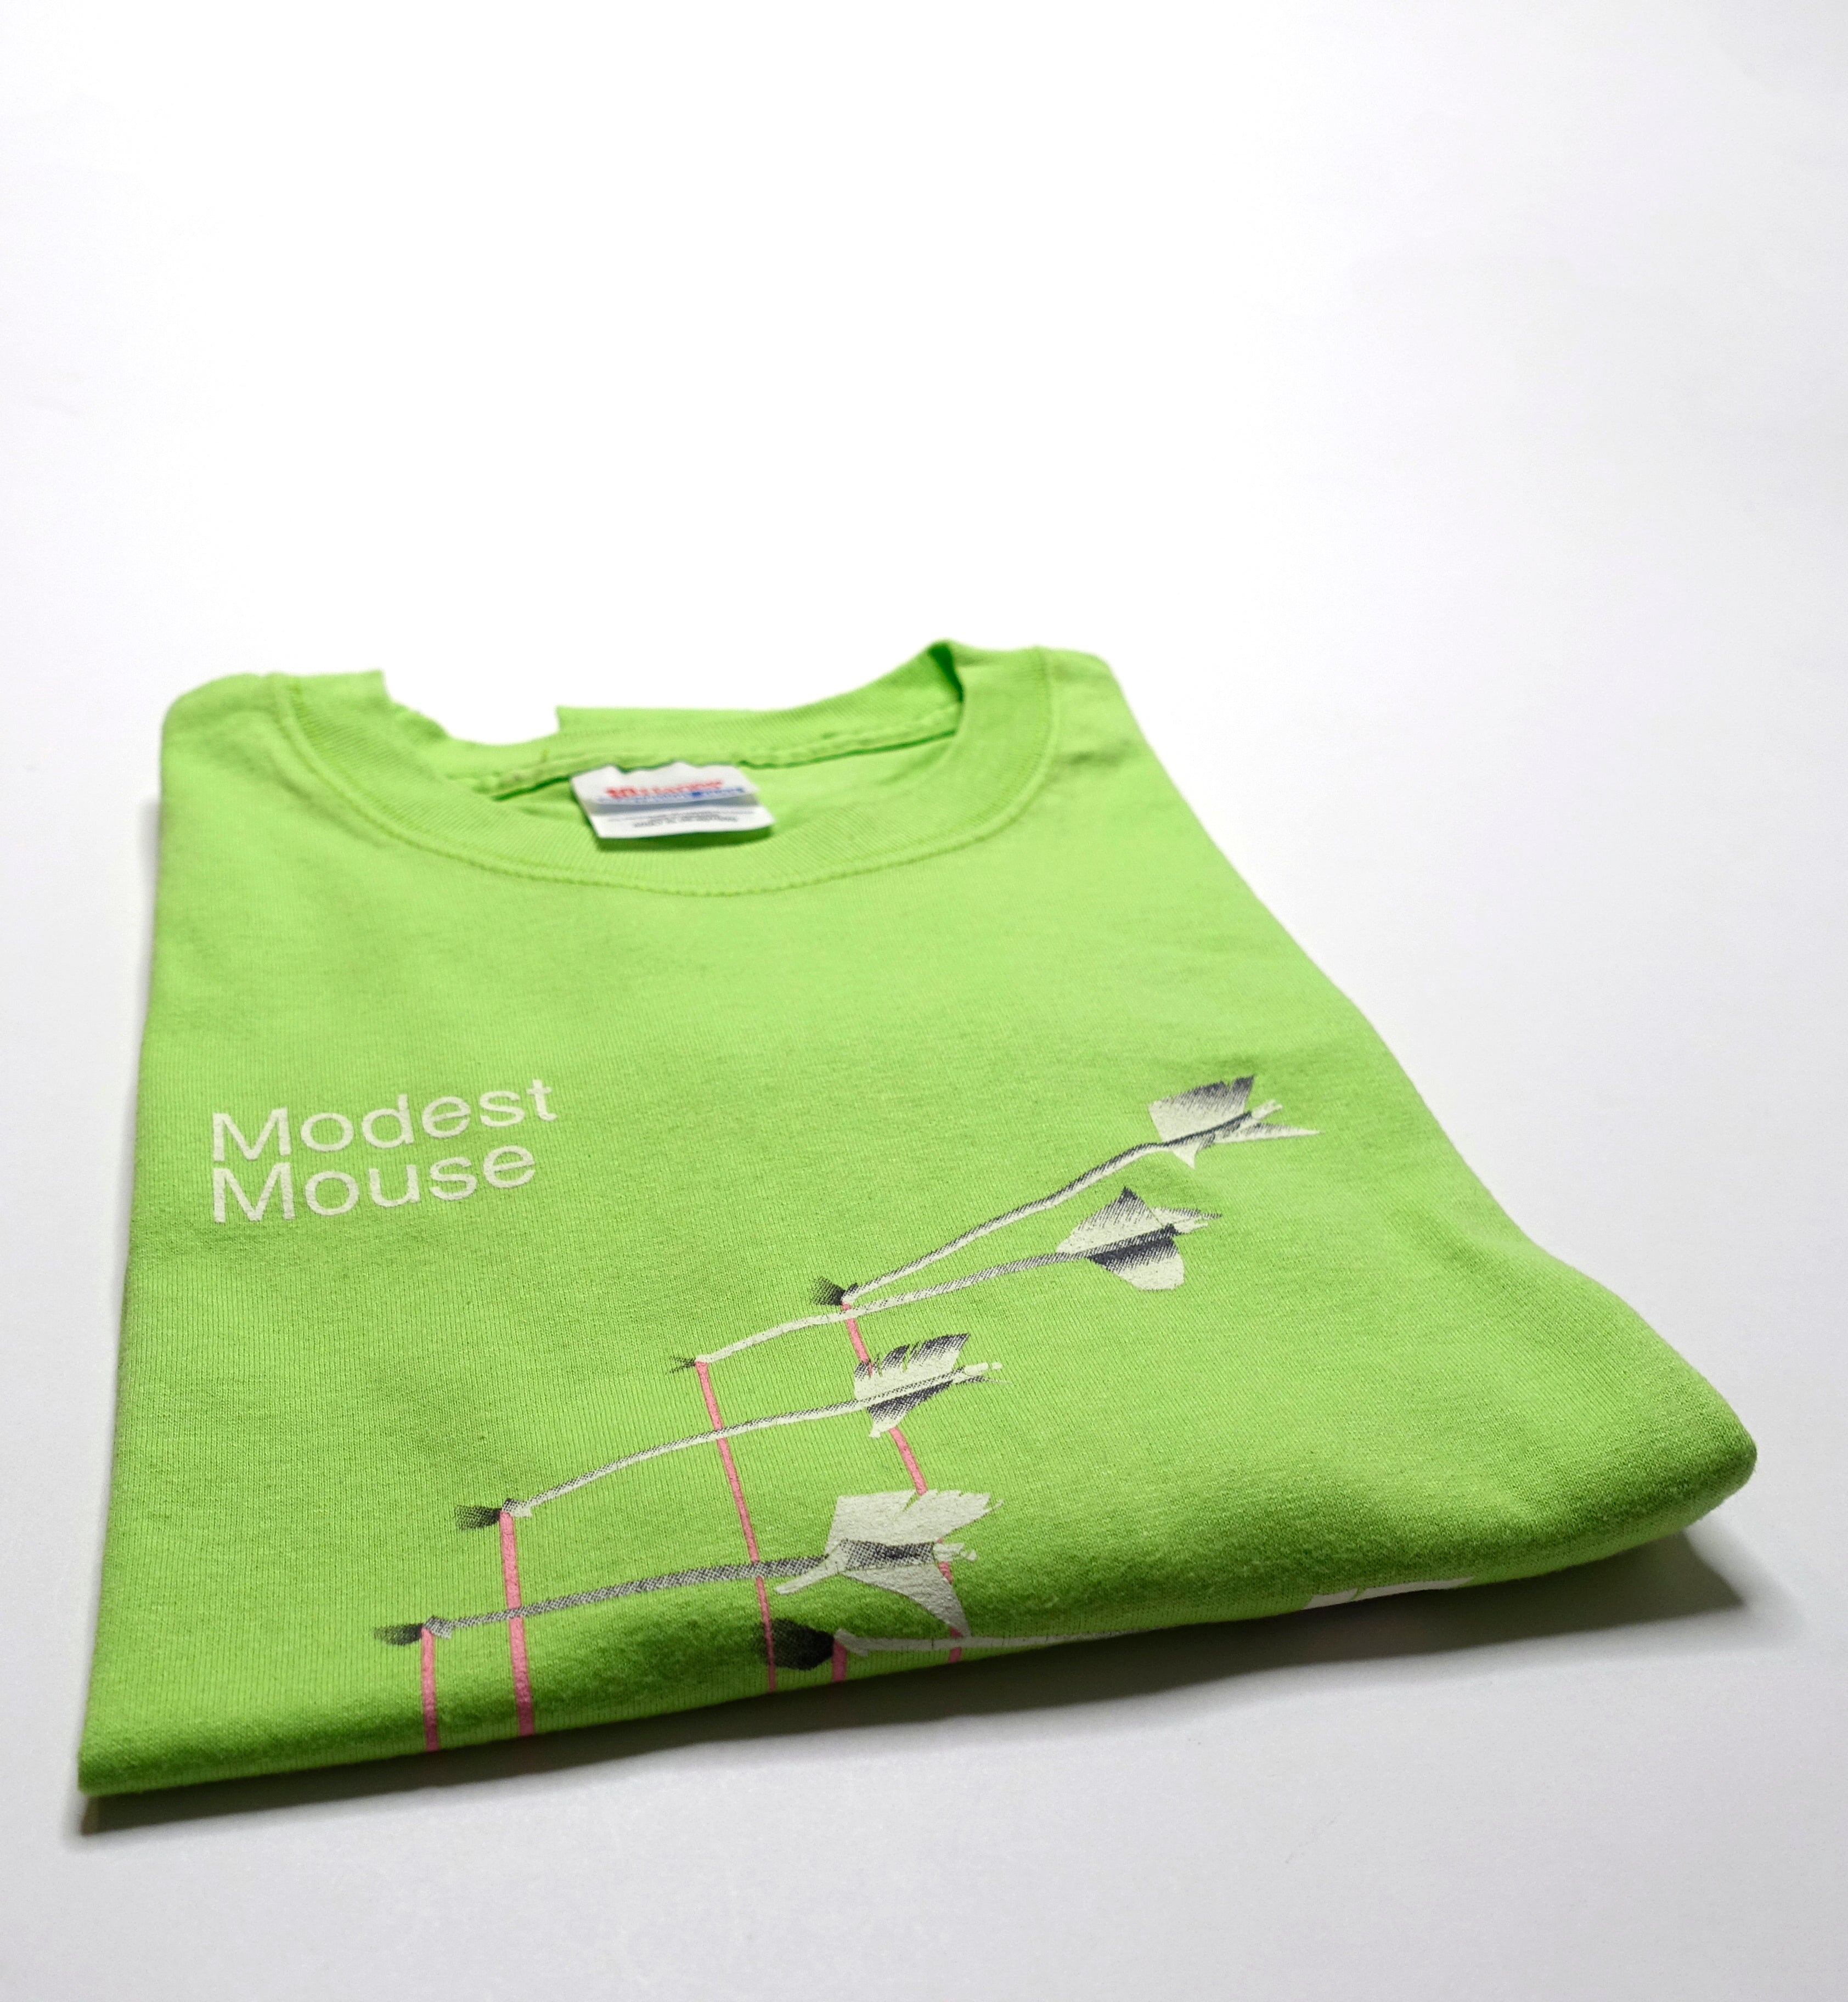 Modest Mouse - Good News For People Who Love Bad News 2004 Tour Shirt Size XL